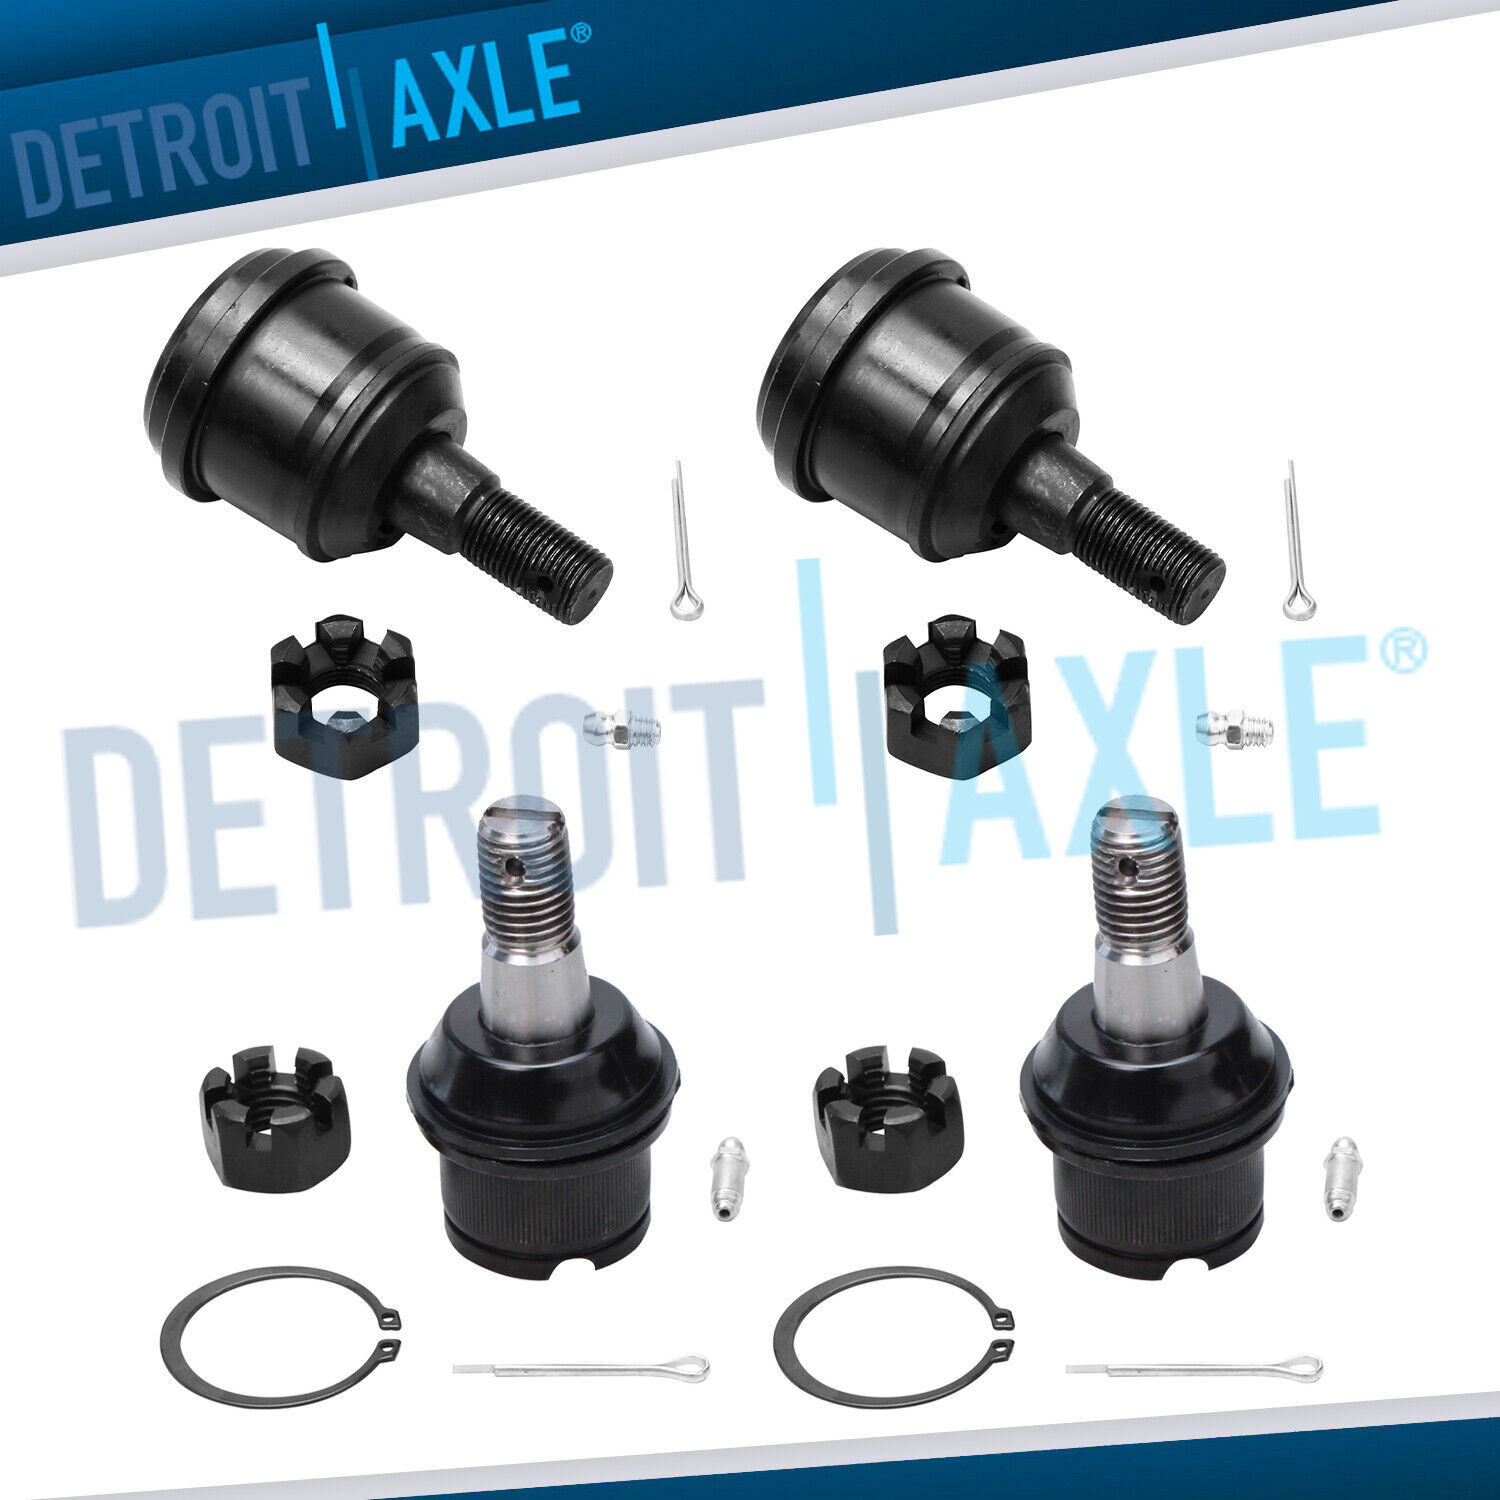 All (4) New Front Upper & Lower Suspension Ball Joint for Dodge Ram 4x4 8-Lug